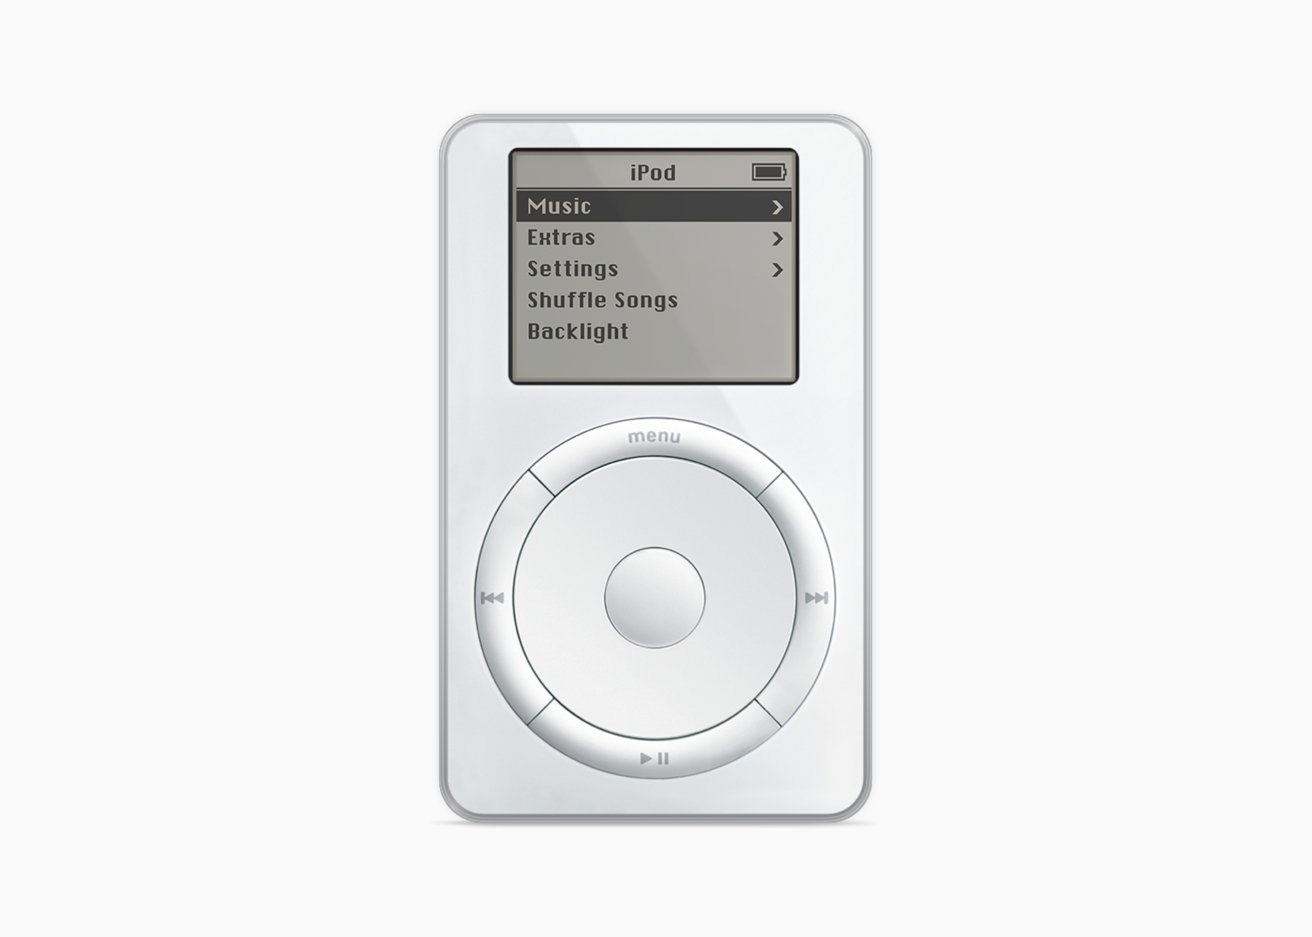 Apple revamped the original iPod form factor under the 